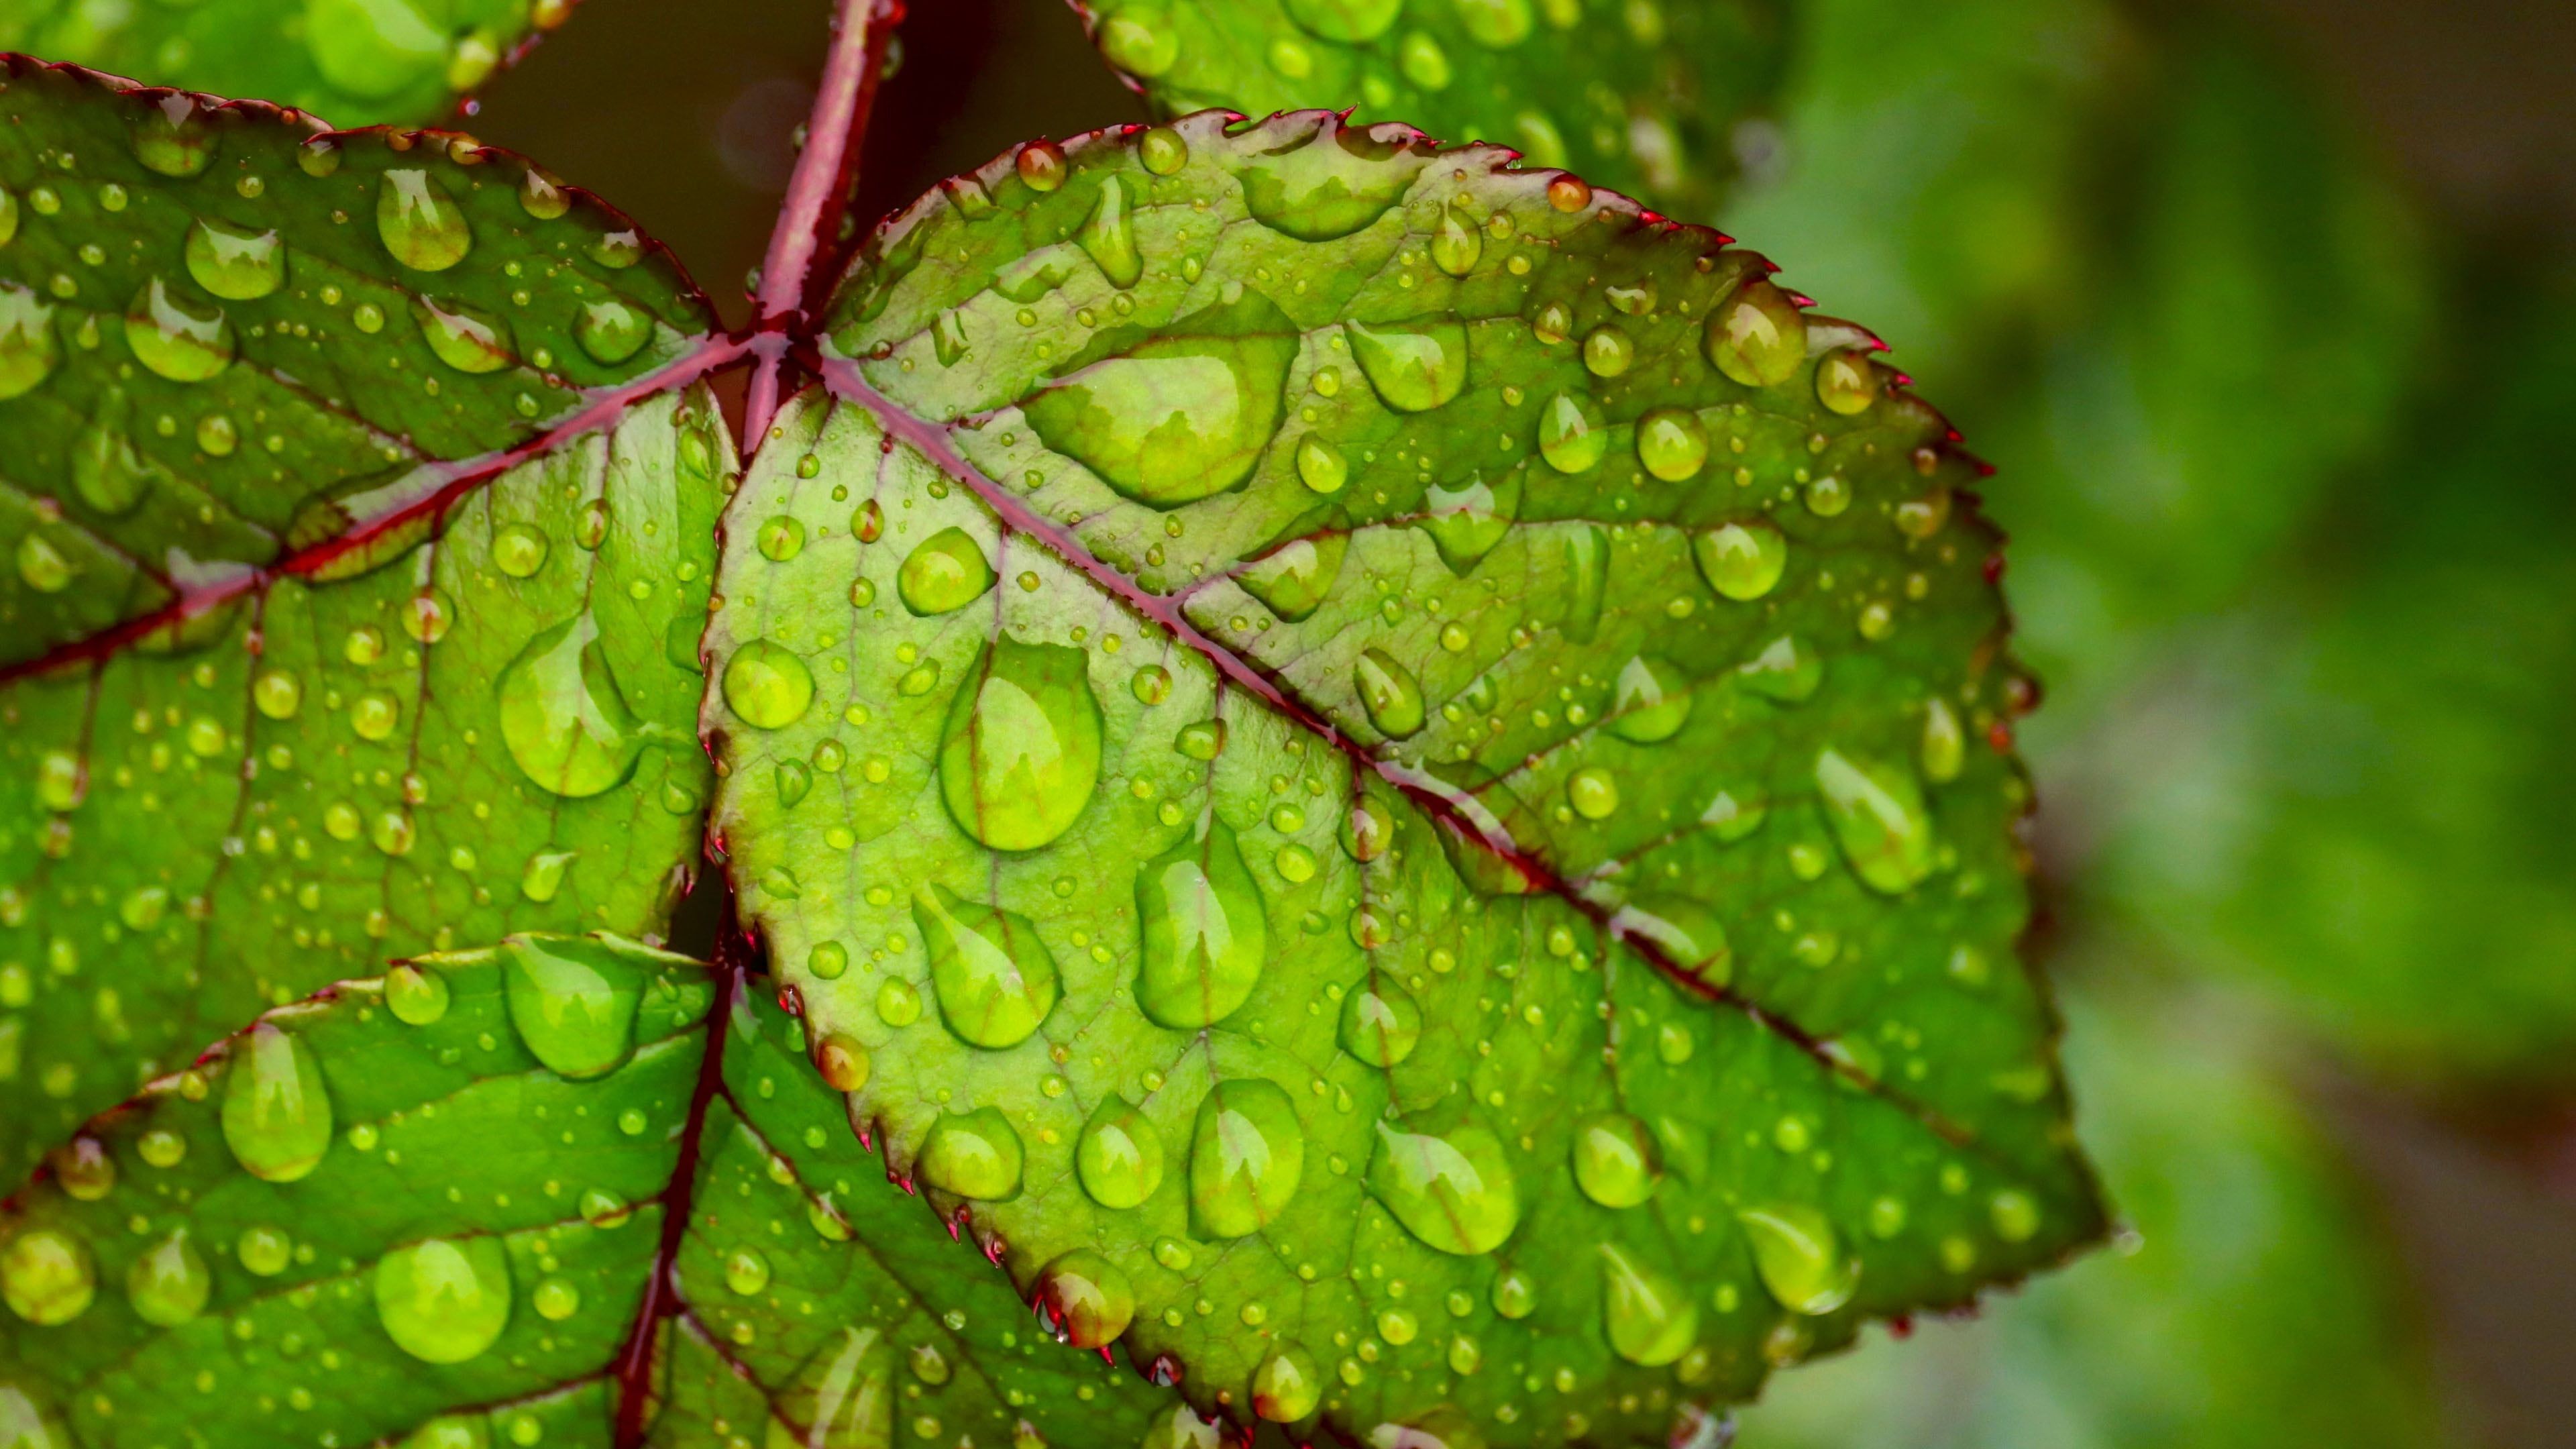 Water droplets on green leaf 4K Ultra HD Wallpaper for Mobile phones Tablet and PC 3840. Wallpaper for mobile phones, HD nature wallpaper, 4k wallpaper for pc